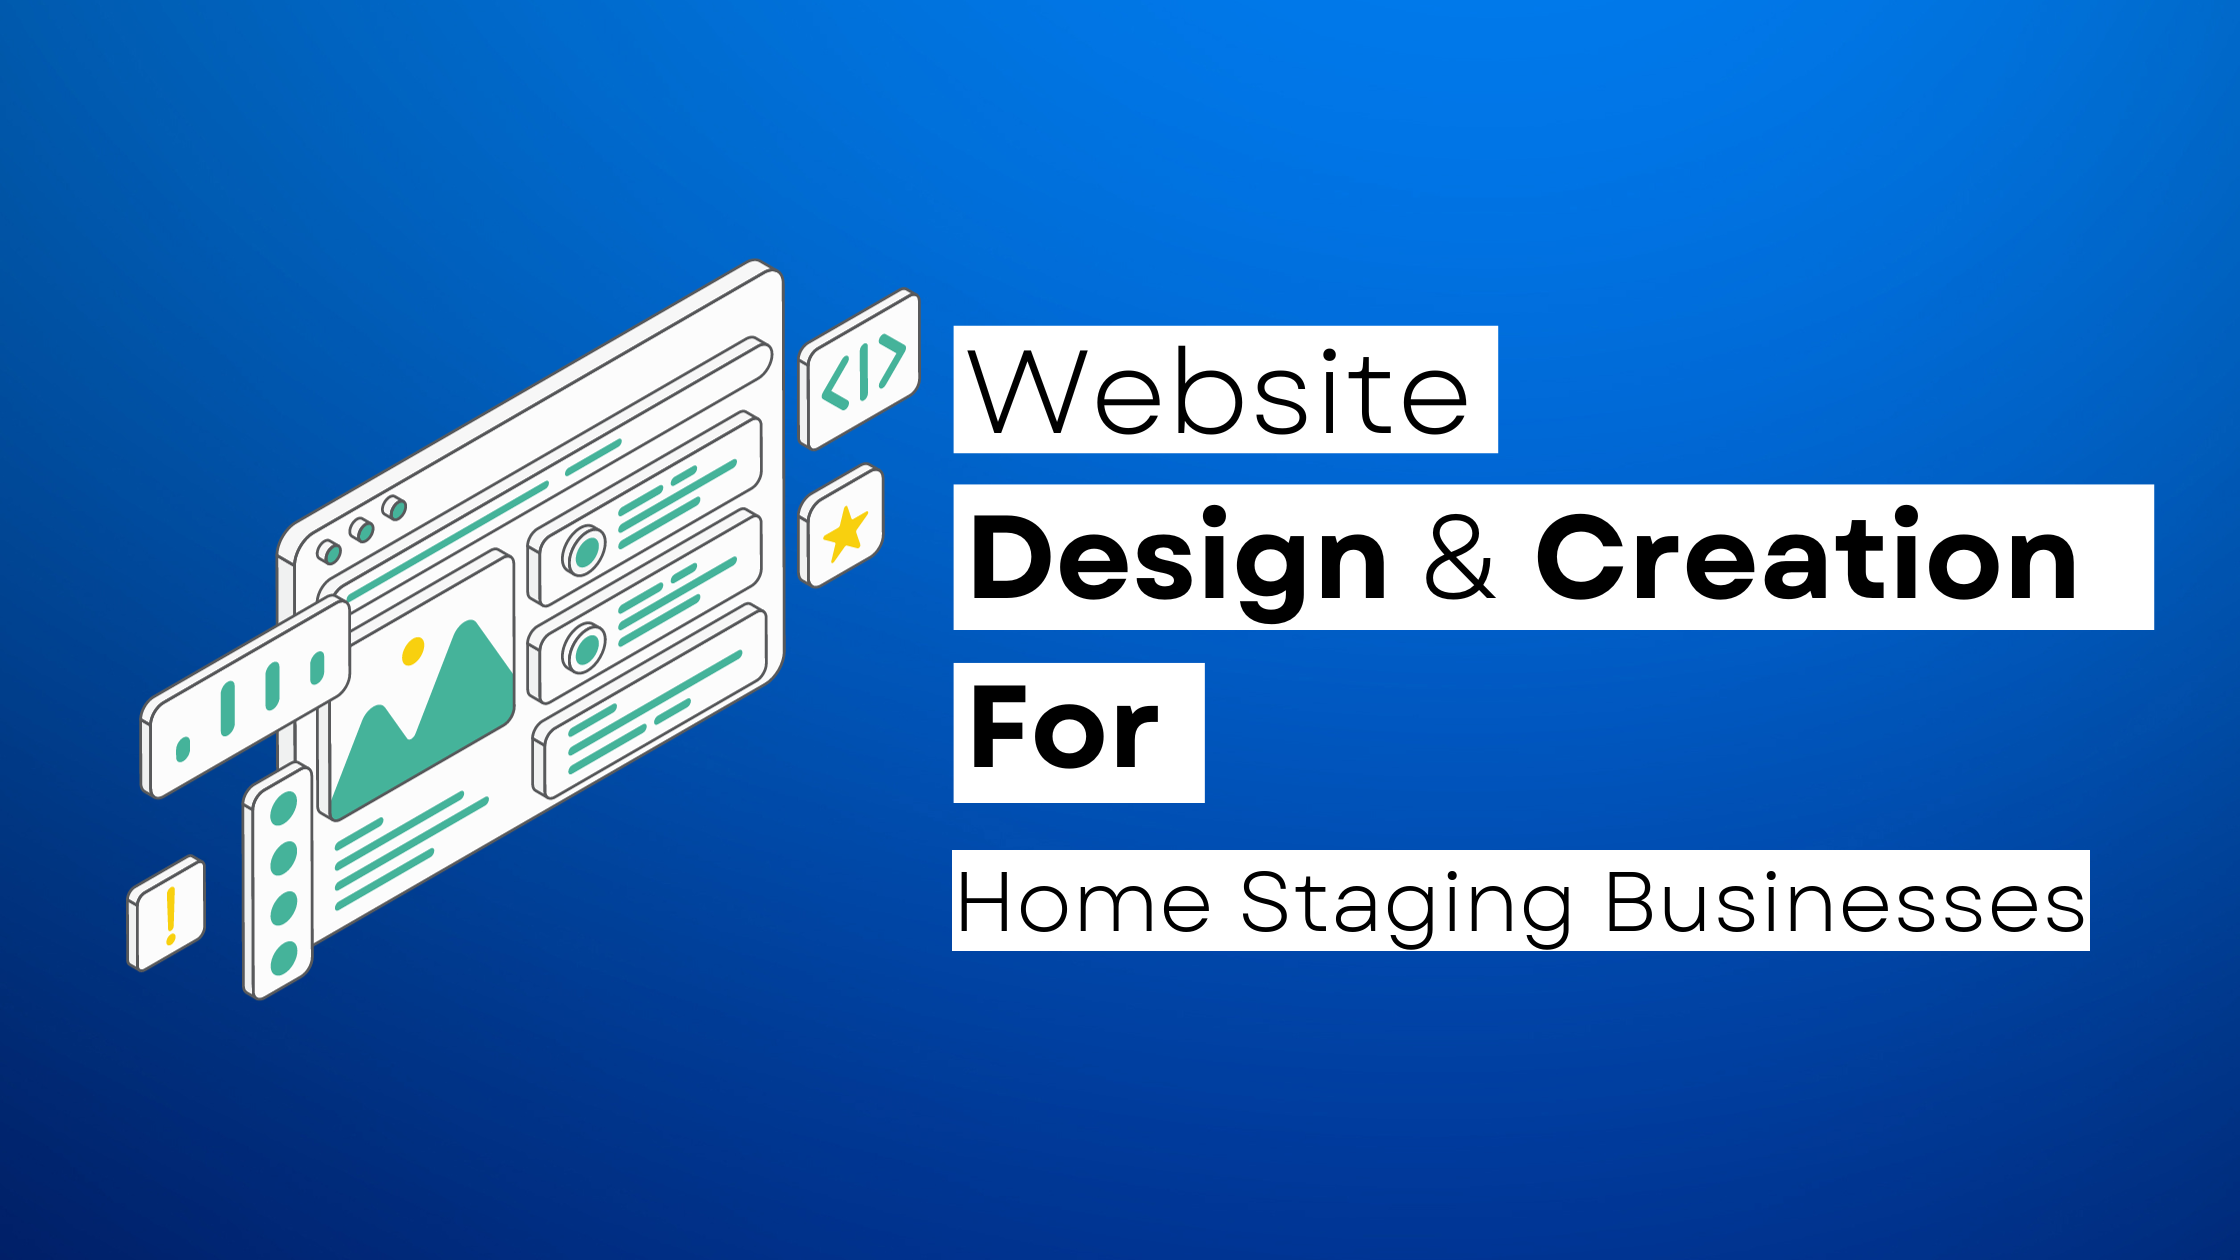 How to start a Home Staging website